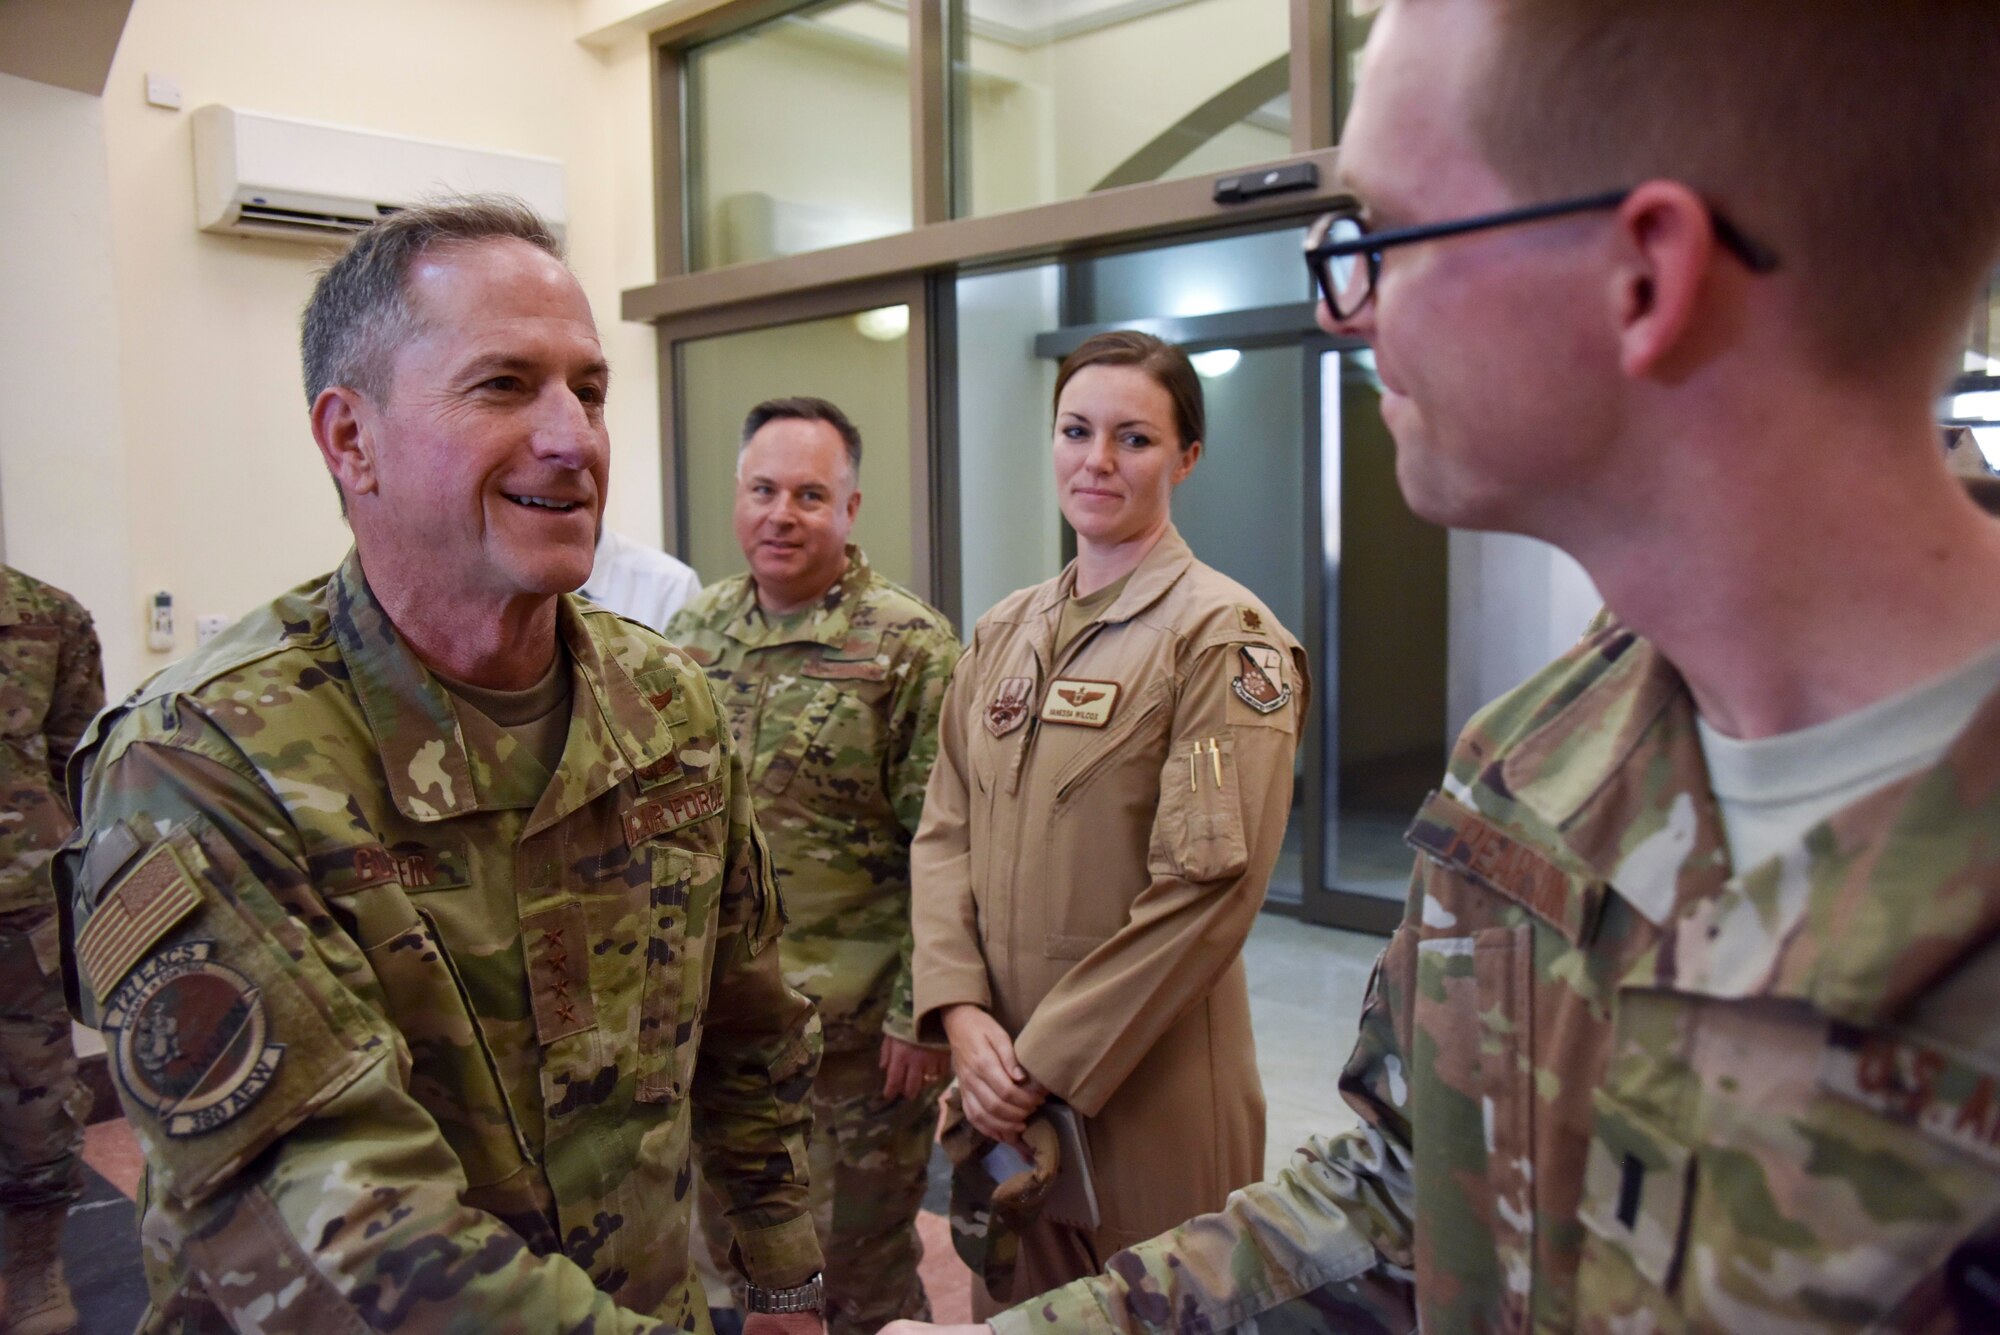 Air Force Chief of Staff Gen. David L. Goldfein speaks with an Airman after arriving at Al Udeid Air Base, Qatar on Nov. 17, 2019. During their first overseas trip, Secretary of the Air Force Barbara Barrett and Goldfein met with AUAB and Qatari leadership, held an all-call where they spoke to readiness, lethality and the future of the U.S. Air Force and visited Airmen and the facilities where they work and live. (U.S. Air Force photo by Tech. Sgt. John Wilkes)